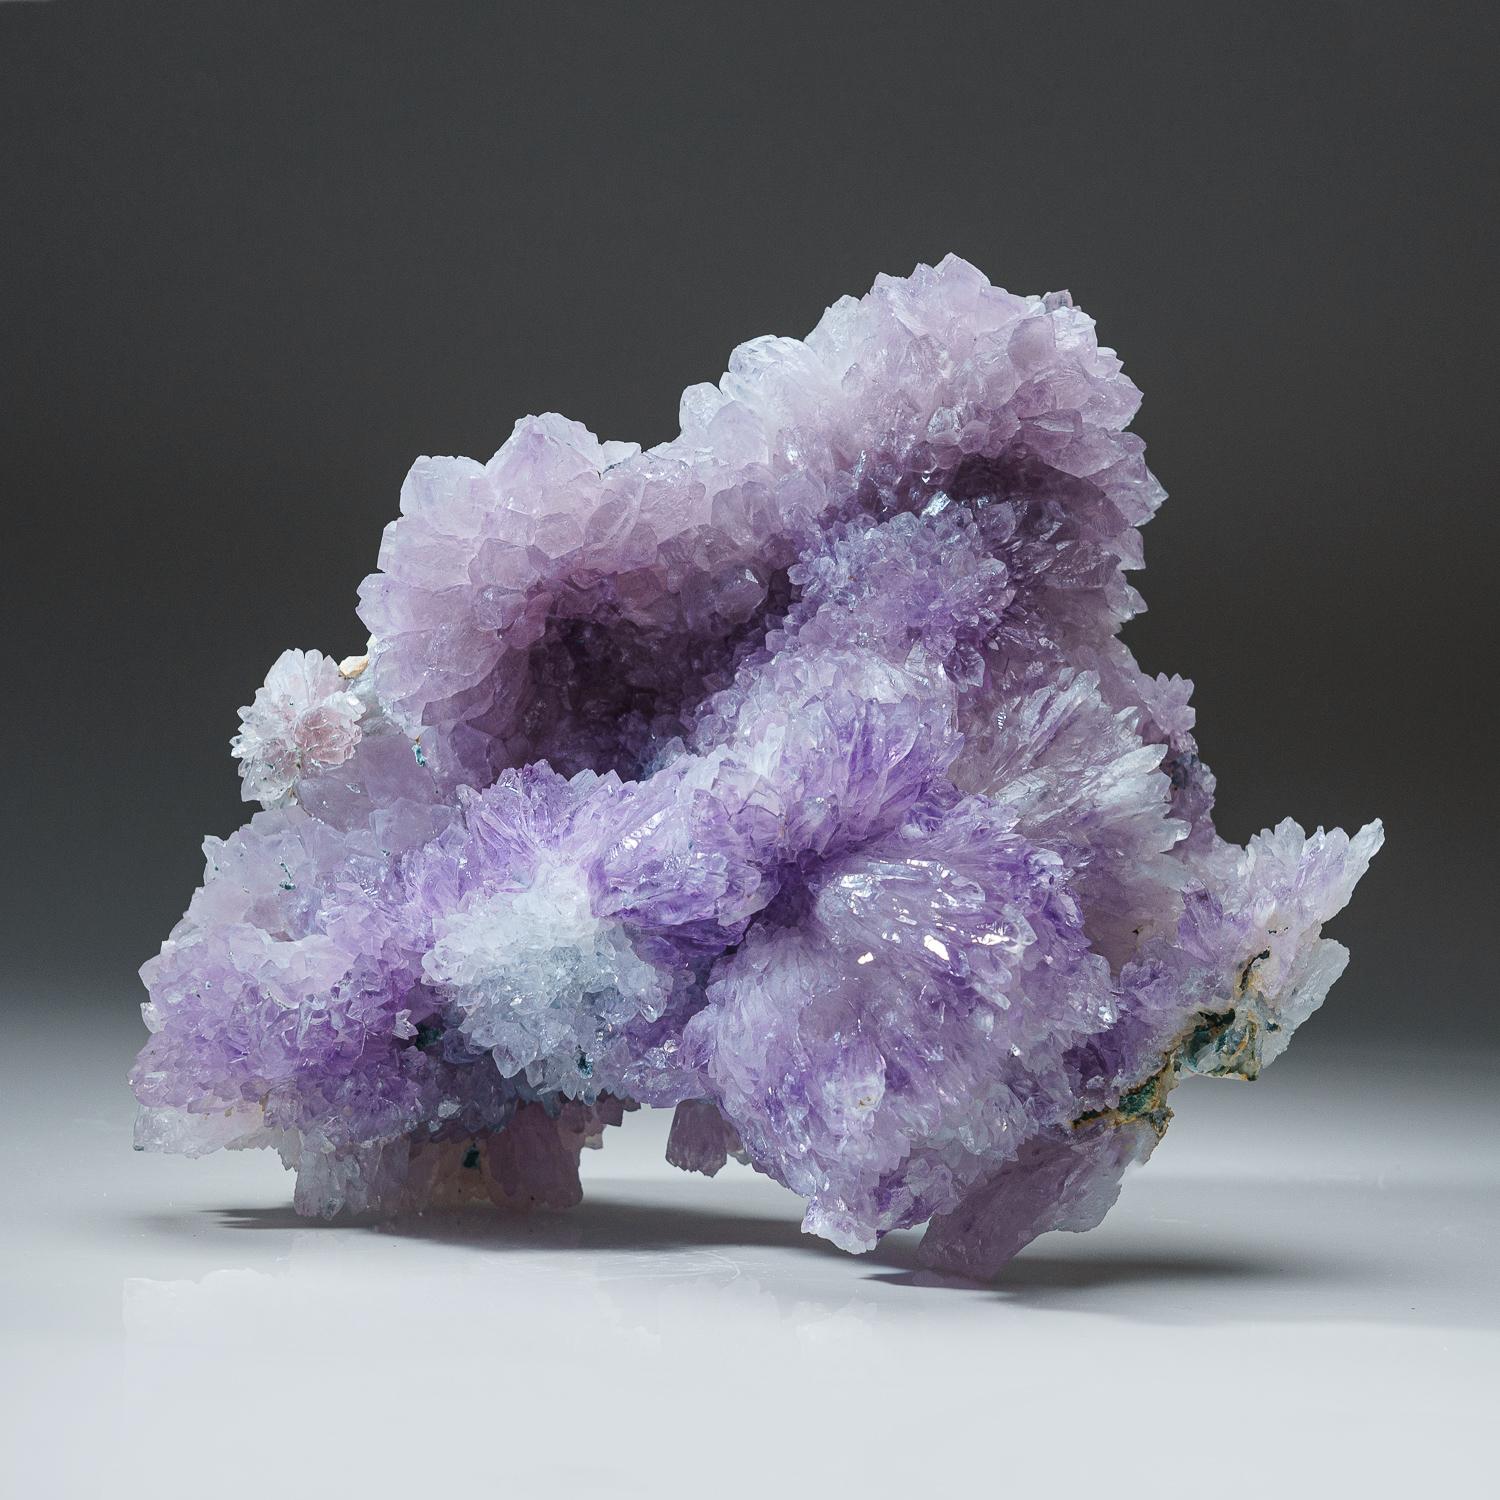 Quartz var. Amethyst flower from Rio Grande do Sul, Brazil.

Aesthetic formation of lustrous transparent purple amethyst quartz crystals in fan-shaped aggregate. These formations are commonly called Amethyst Flowers because they resemble a